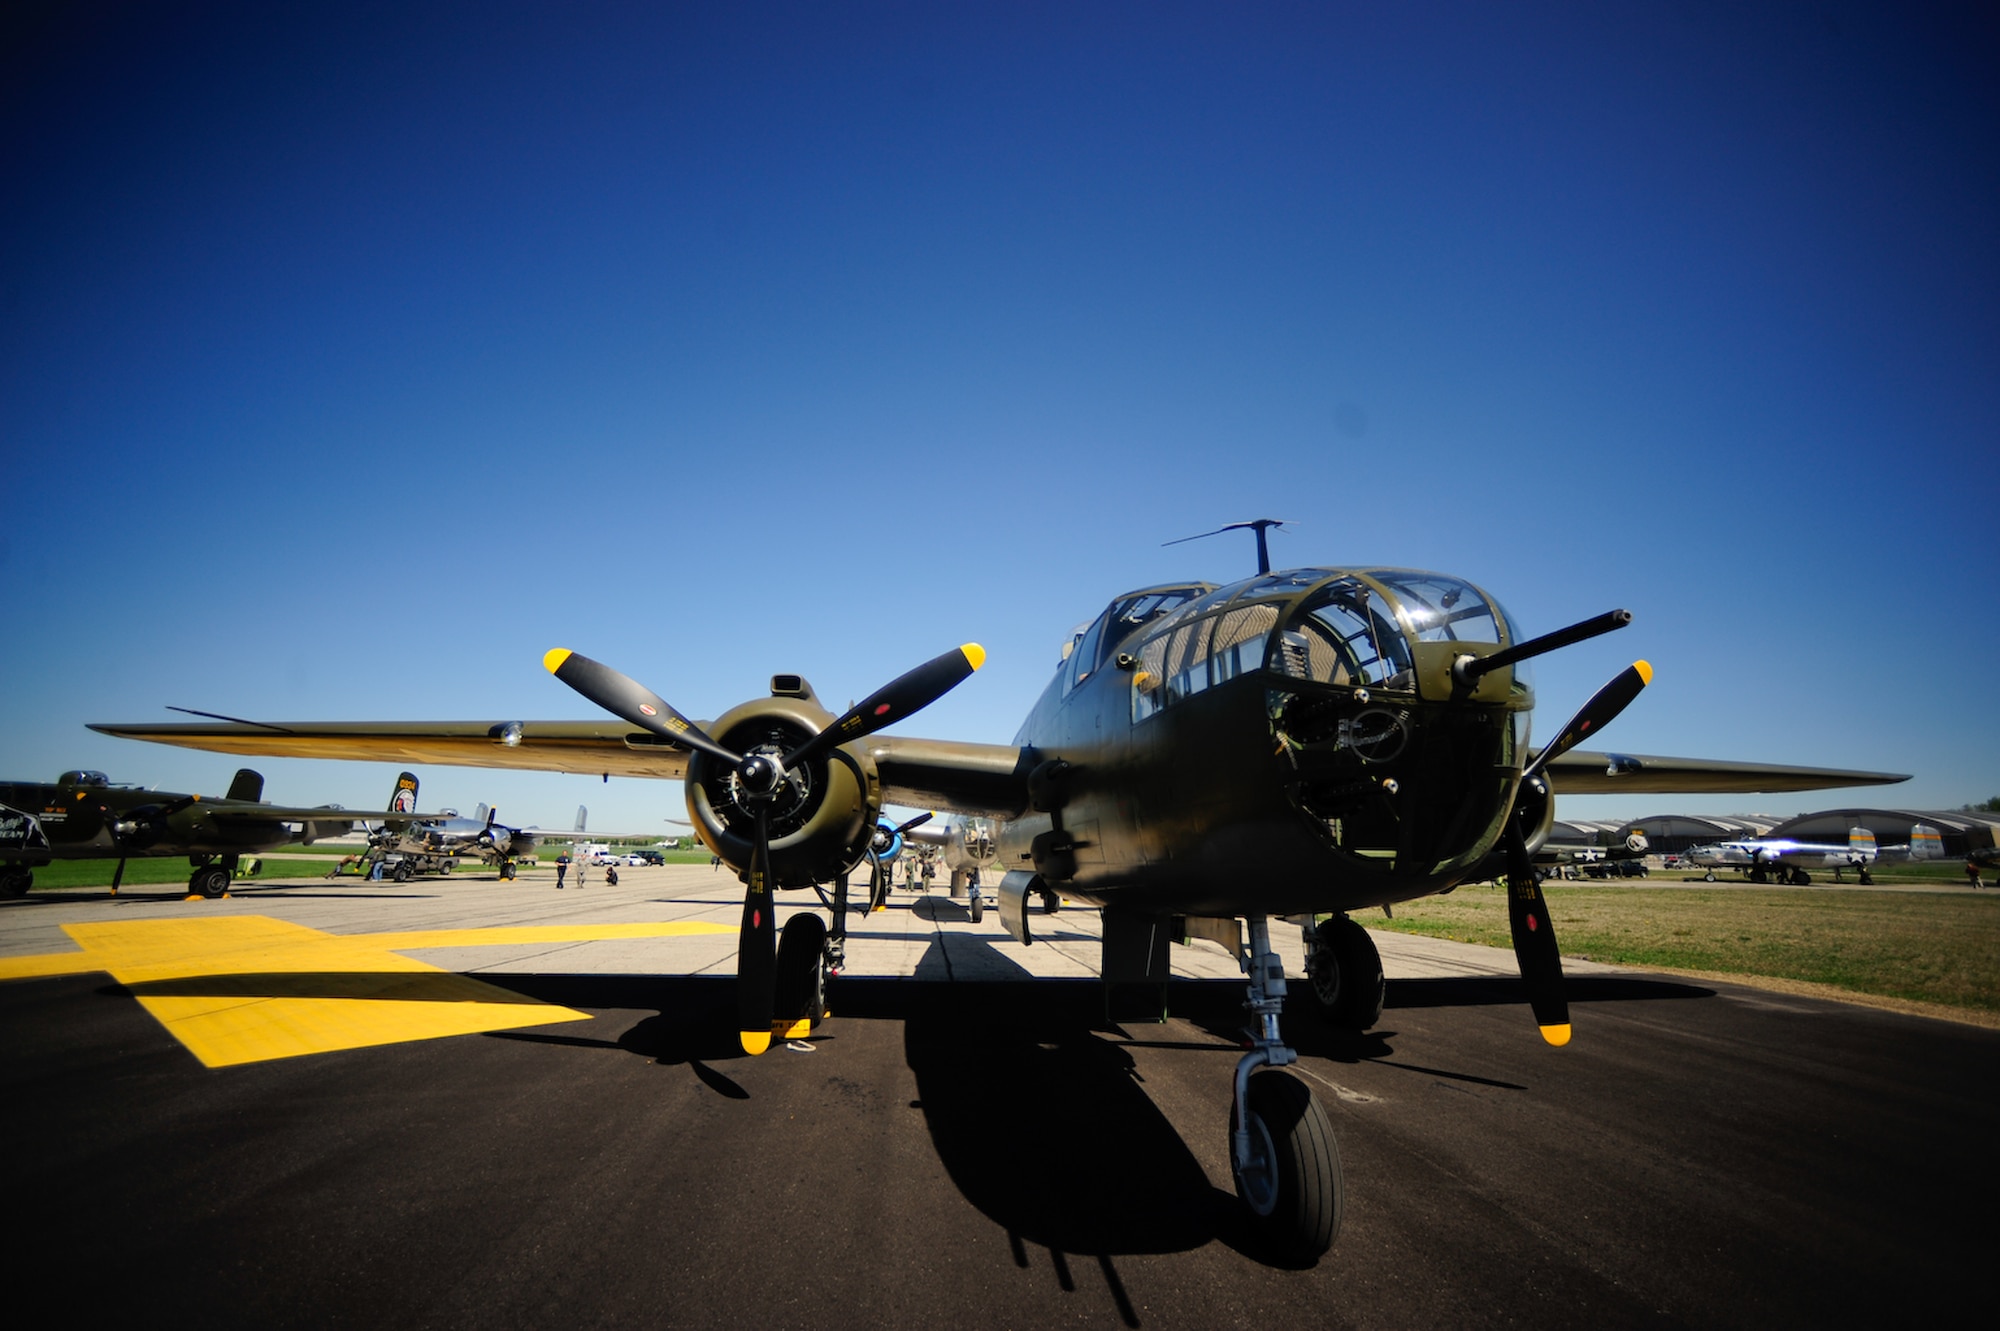 Vintage B-25 Mitchell bombers stand ready to start engines and take off from the National Museum of the U.S. Air Force at Wright-Patterson Air Force Base, Ohio.  They will join a 17-ship formation to take part in a memorial flight honoring the Doolittle Tokyo Raiders on April 18, 2010.  The 68th Doolittle Raiders' reunion commemorates the anniversary of the raid on April 18, 1942, by U.S. Army Air Forces Lt. Col. Jimmy Doolittle's squadron of 16 B-25 Mitchell bombers. The raid onTokyo was in response to Japan's attack on Pearl Harbor. (U.S. Air Force photo/Tech. Sgt. Jacob N. Bailey)

